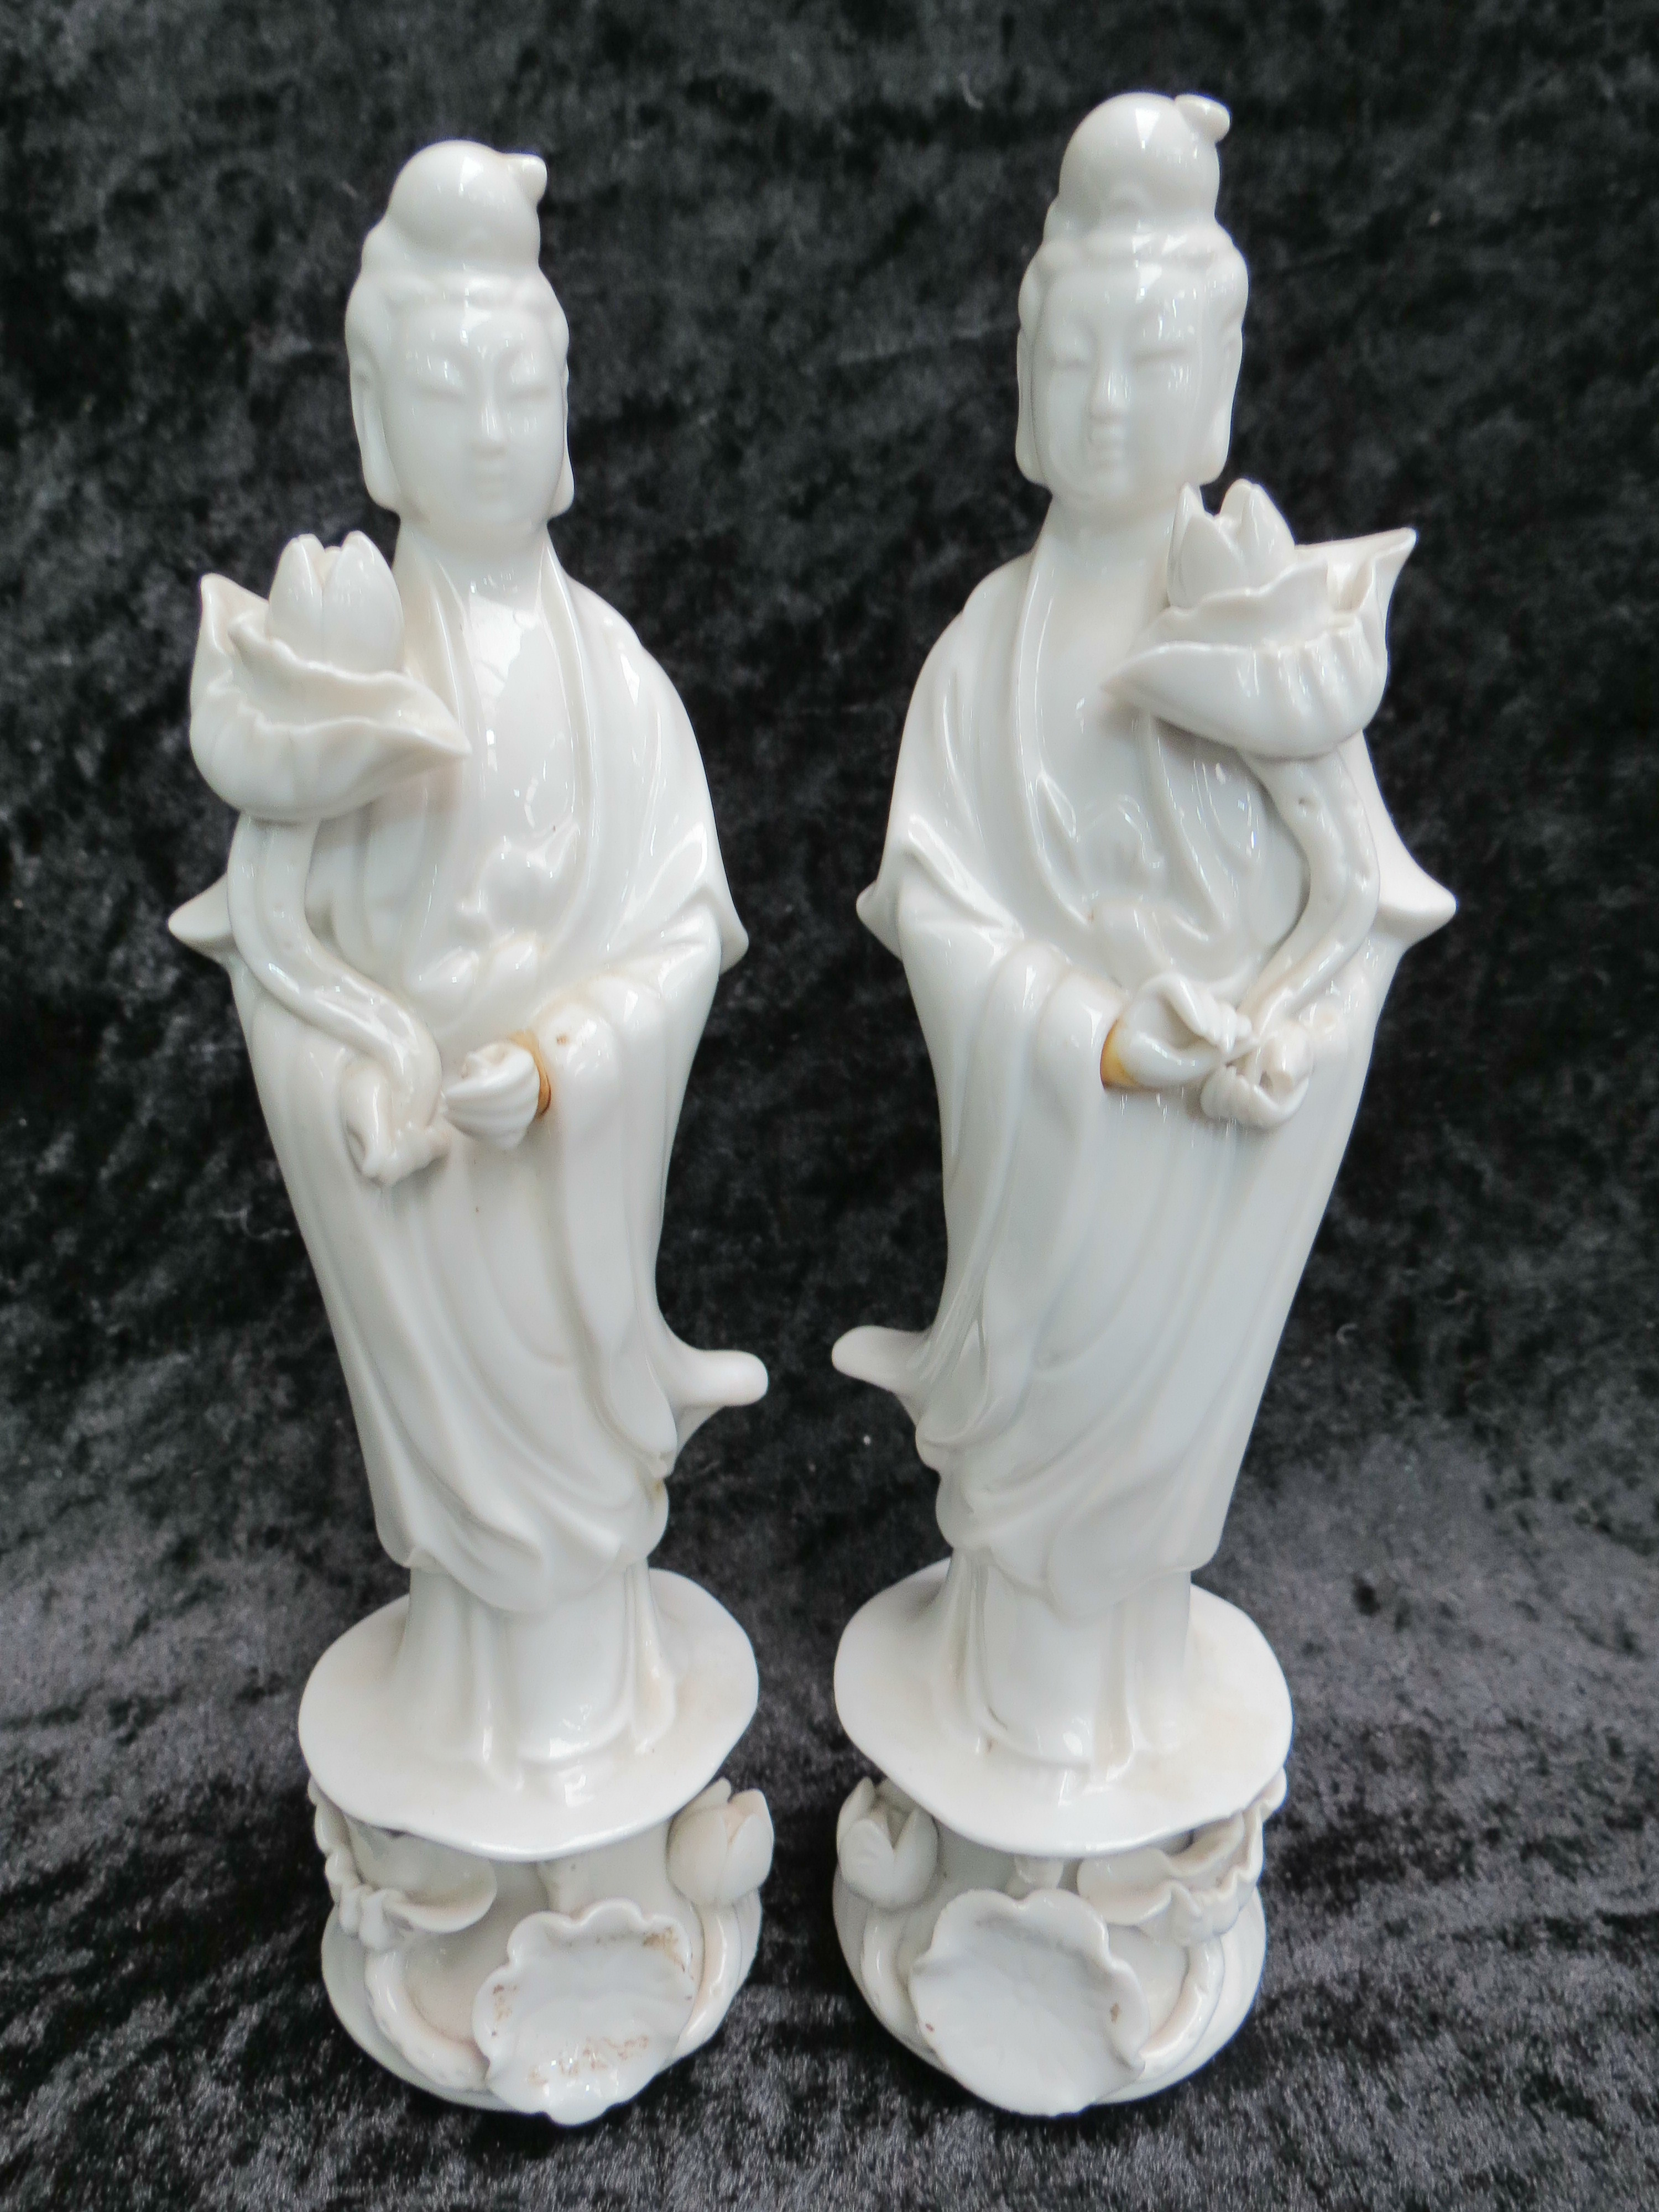 A pair of Blanc de Chine Chinese porcelain figurines in blanc de chine, each holds a lotus and